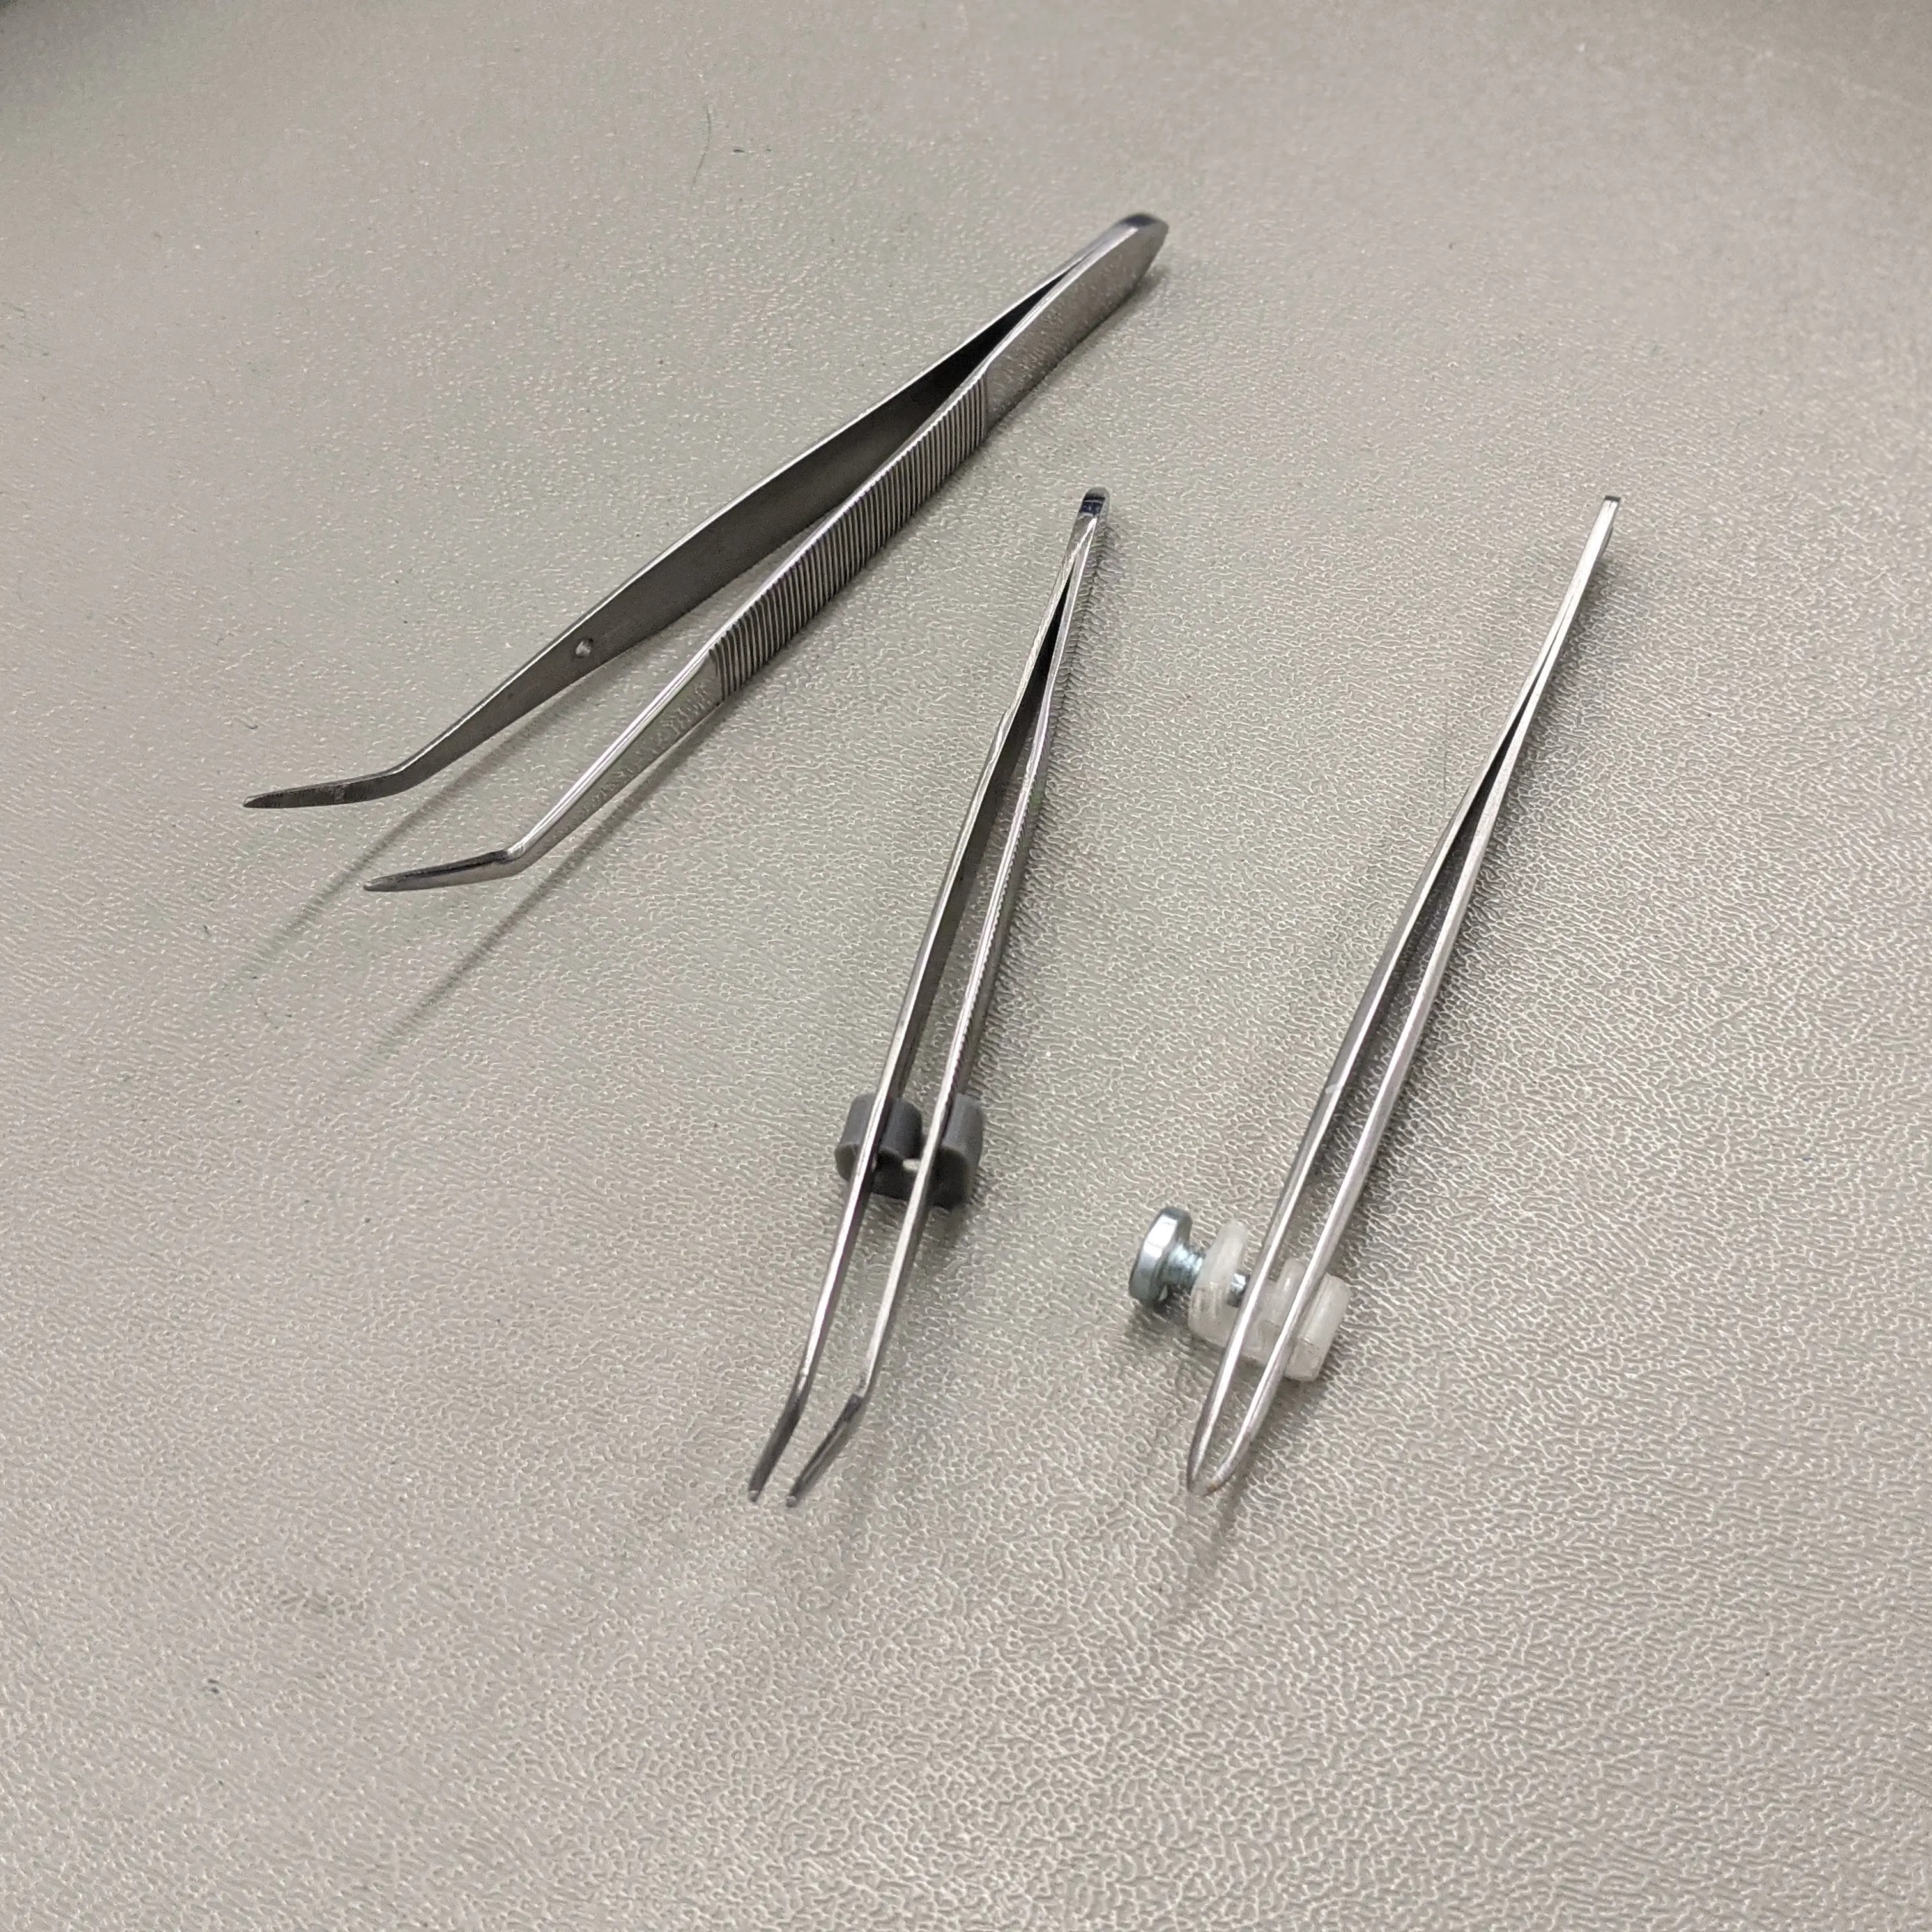 A collection of tweezers with the modification attached